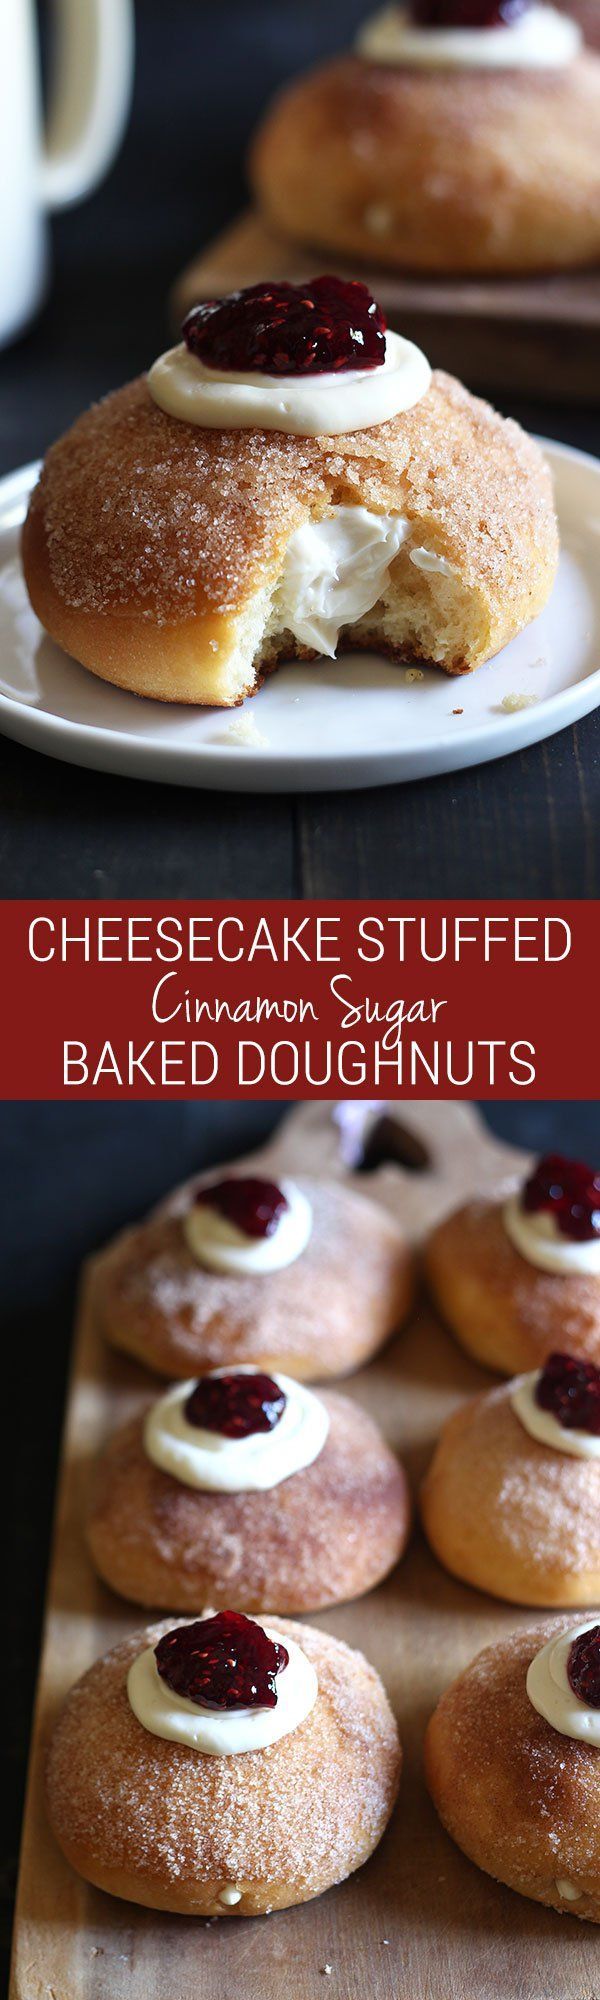 DYING!! These look SOOOO good! Cheesecake Stuffed Baked Doughnuts feature a fluffy yeast-raised baked doughnut coated in cinnamon